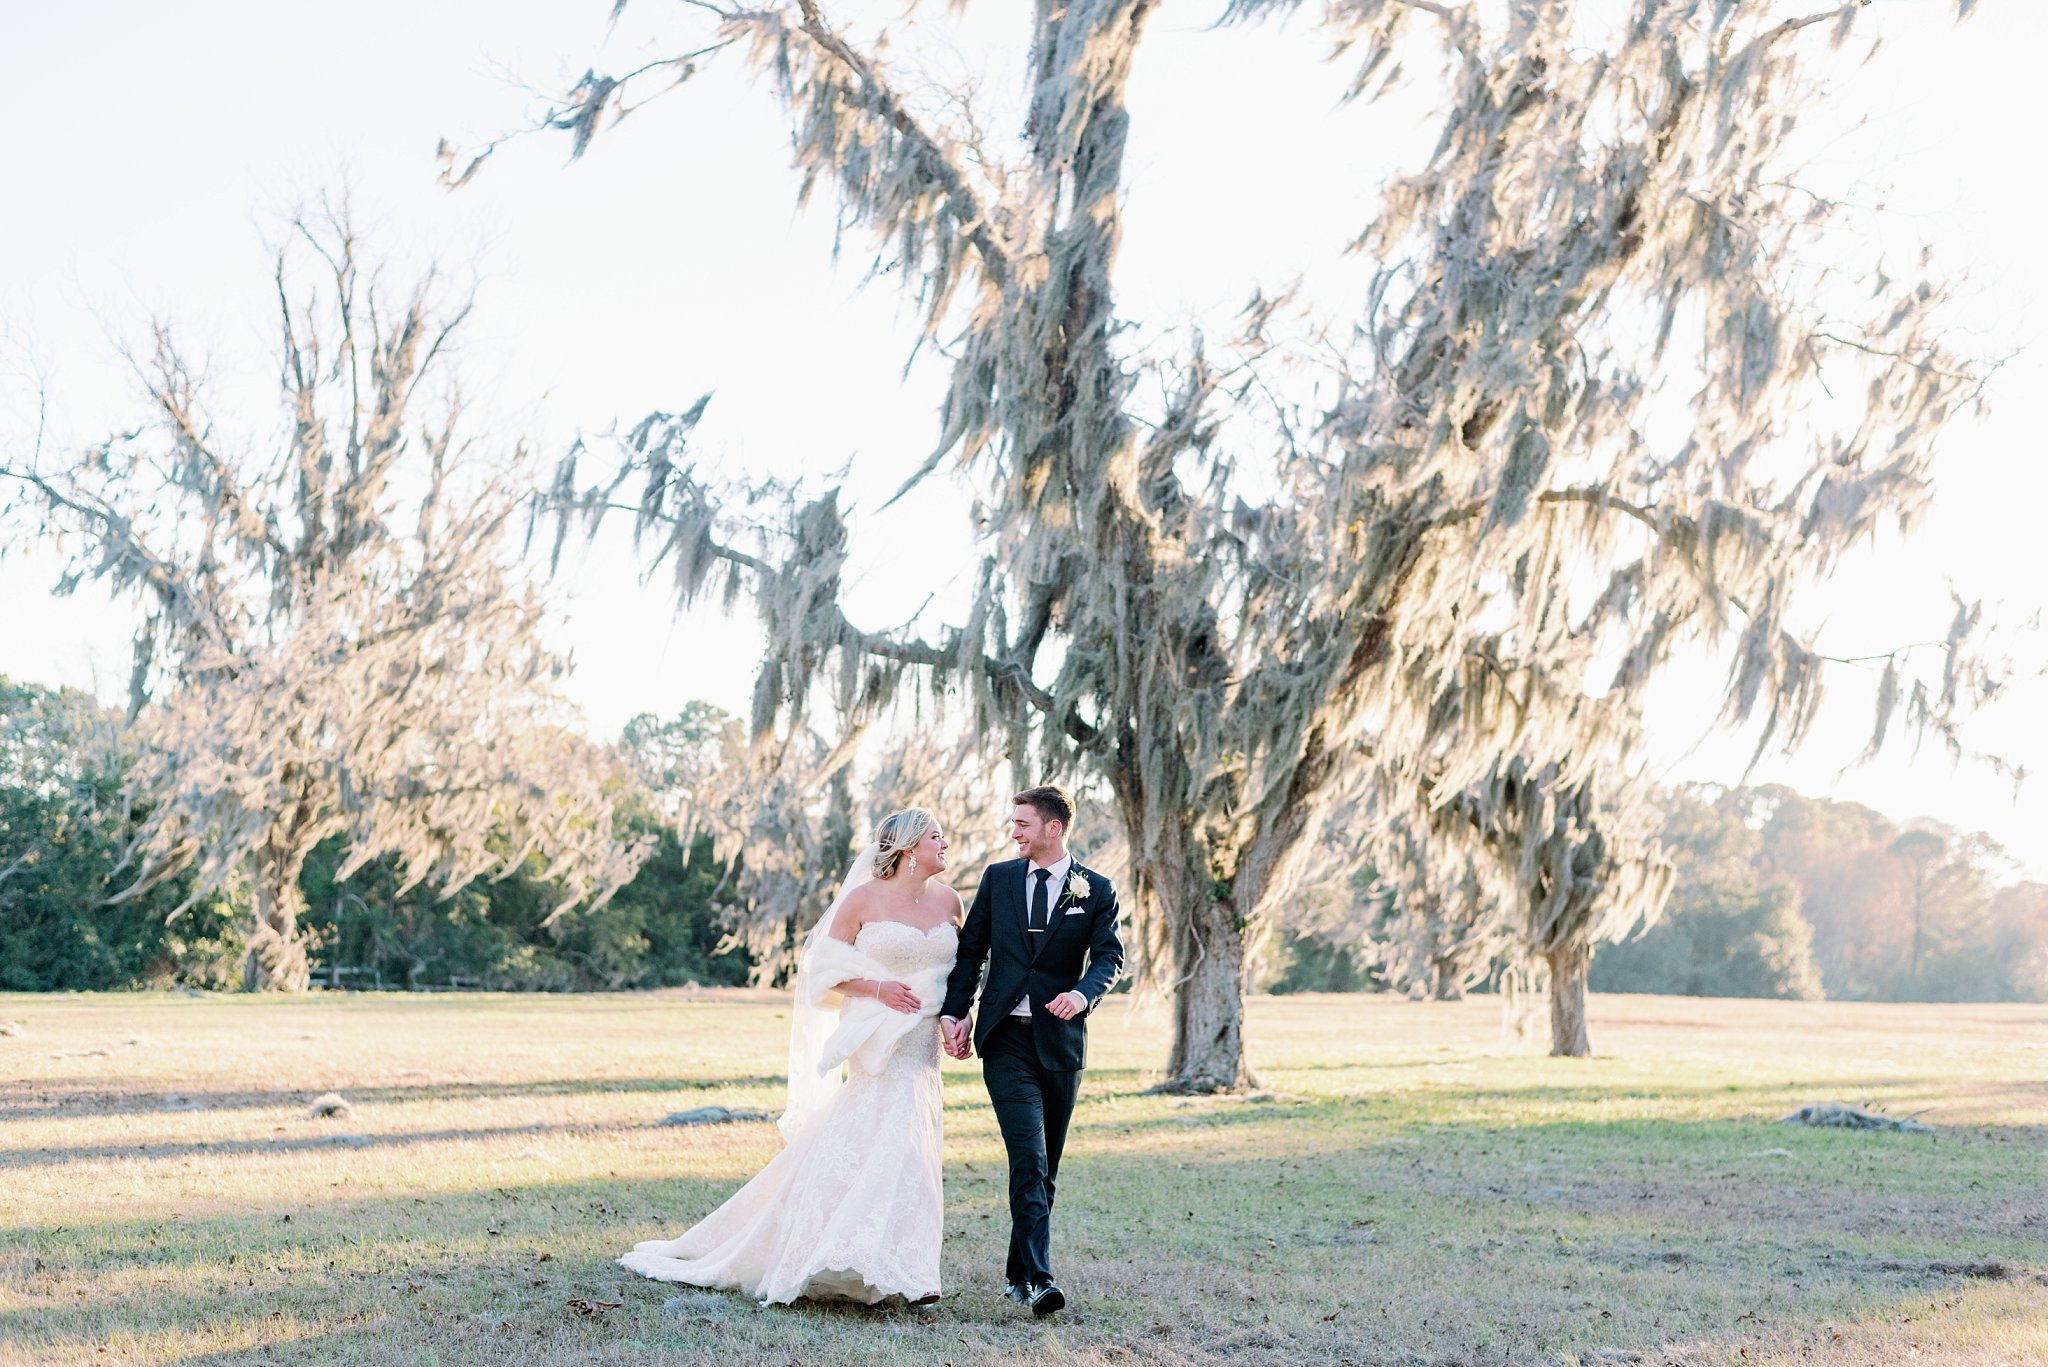 Lowcountry wedding at Beaufort wedding venue Agape Oaks photographed by light and airy affordable fine art Charleston film photographer Kayla Nelson Photography.